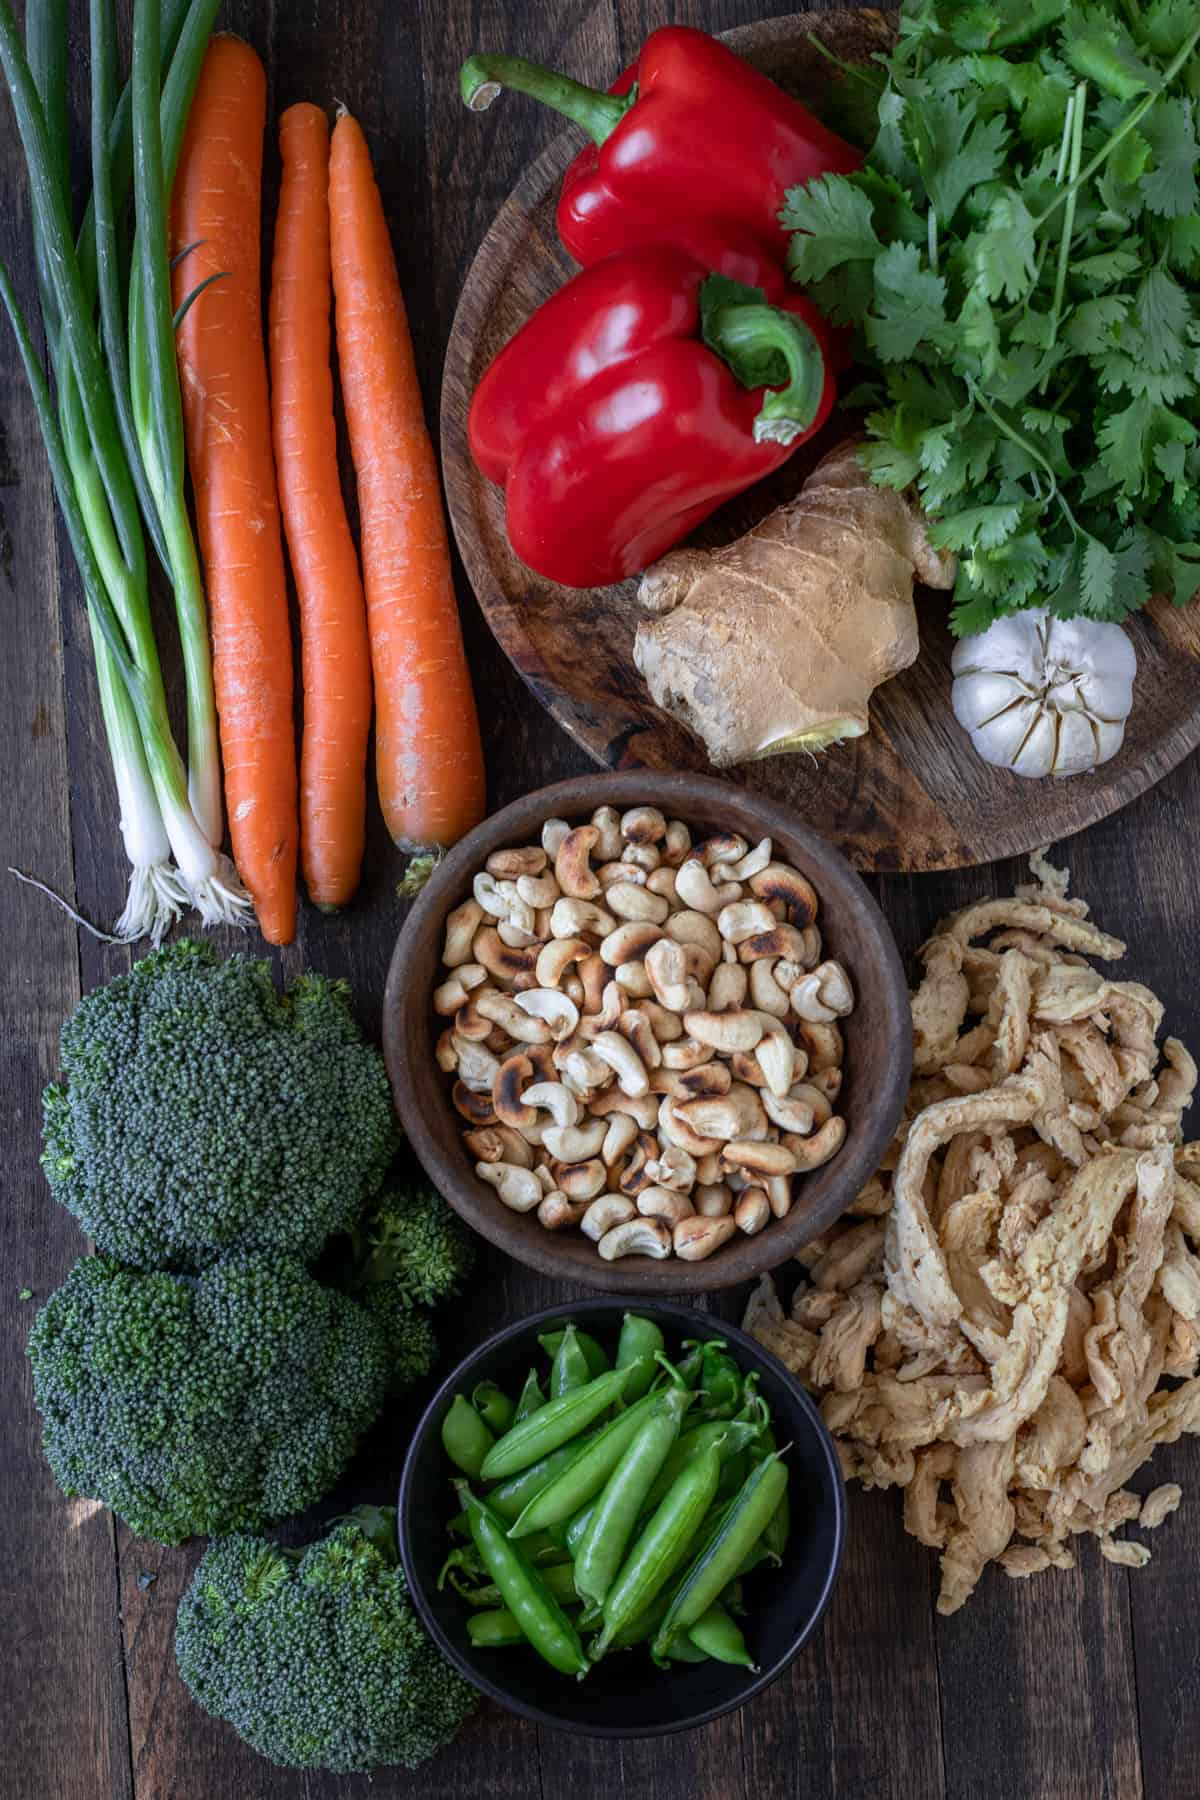 Ingredients for vegan cashew chicken including soy curls, peas, broccoli, carrots, red pepper, ginger and cashews.